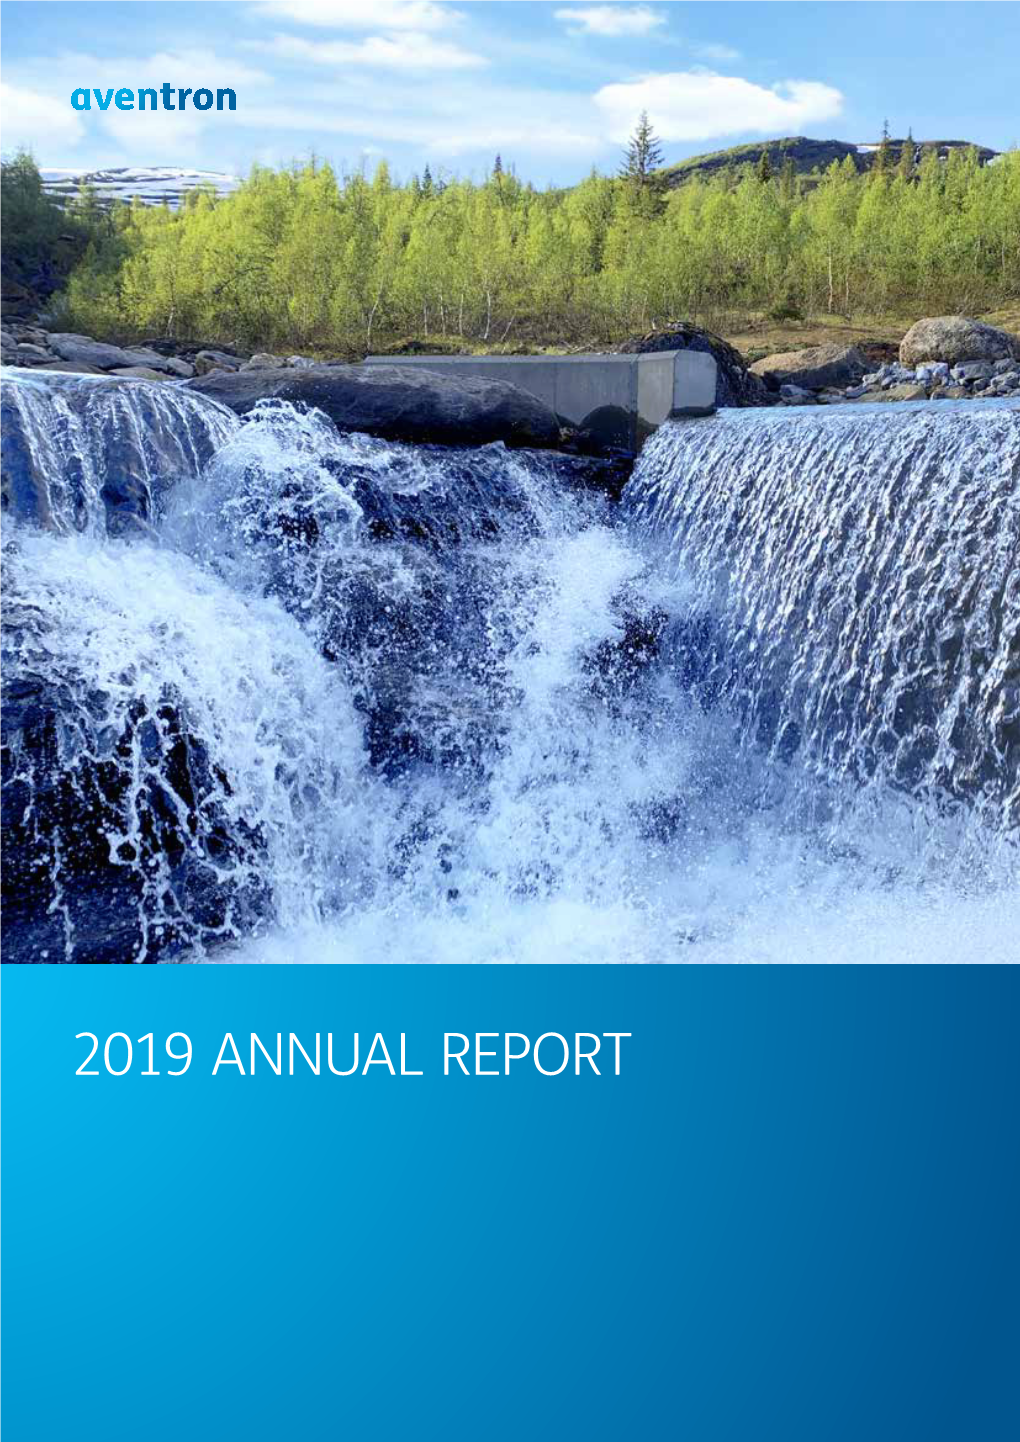 2019 ANNUAL REPORT Aaventronventron an 2019NUA ANNUALL REPORT REPORT2019